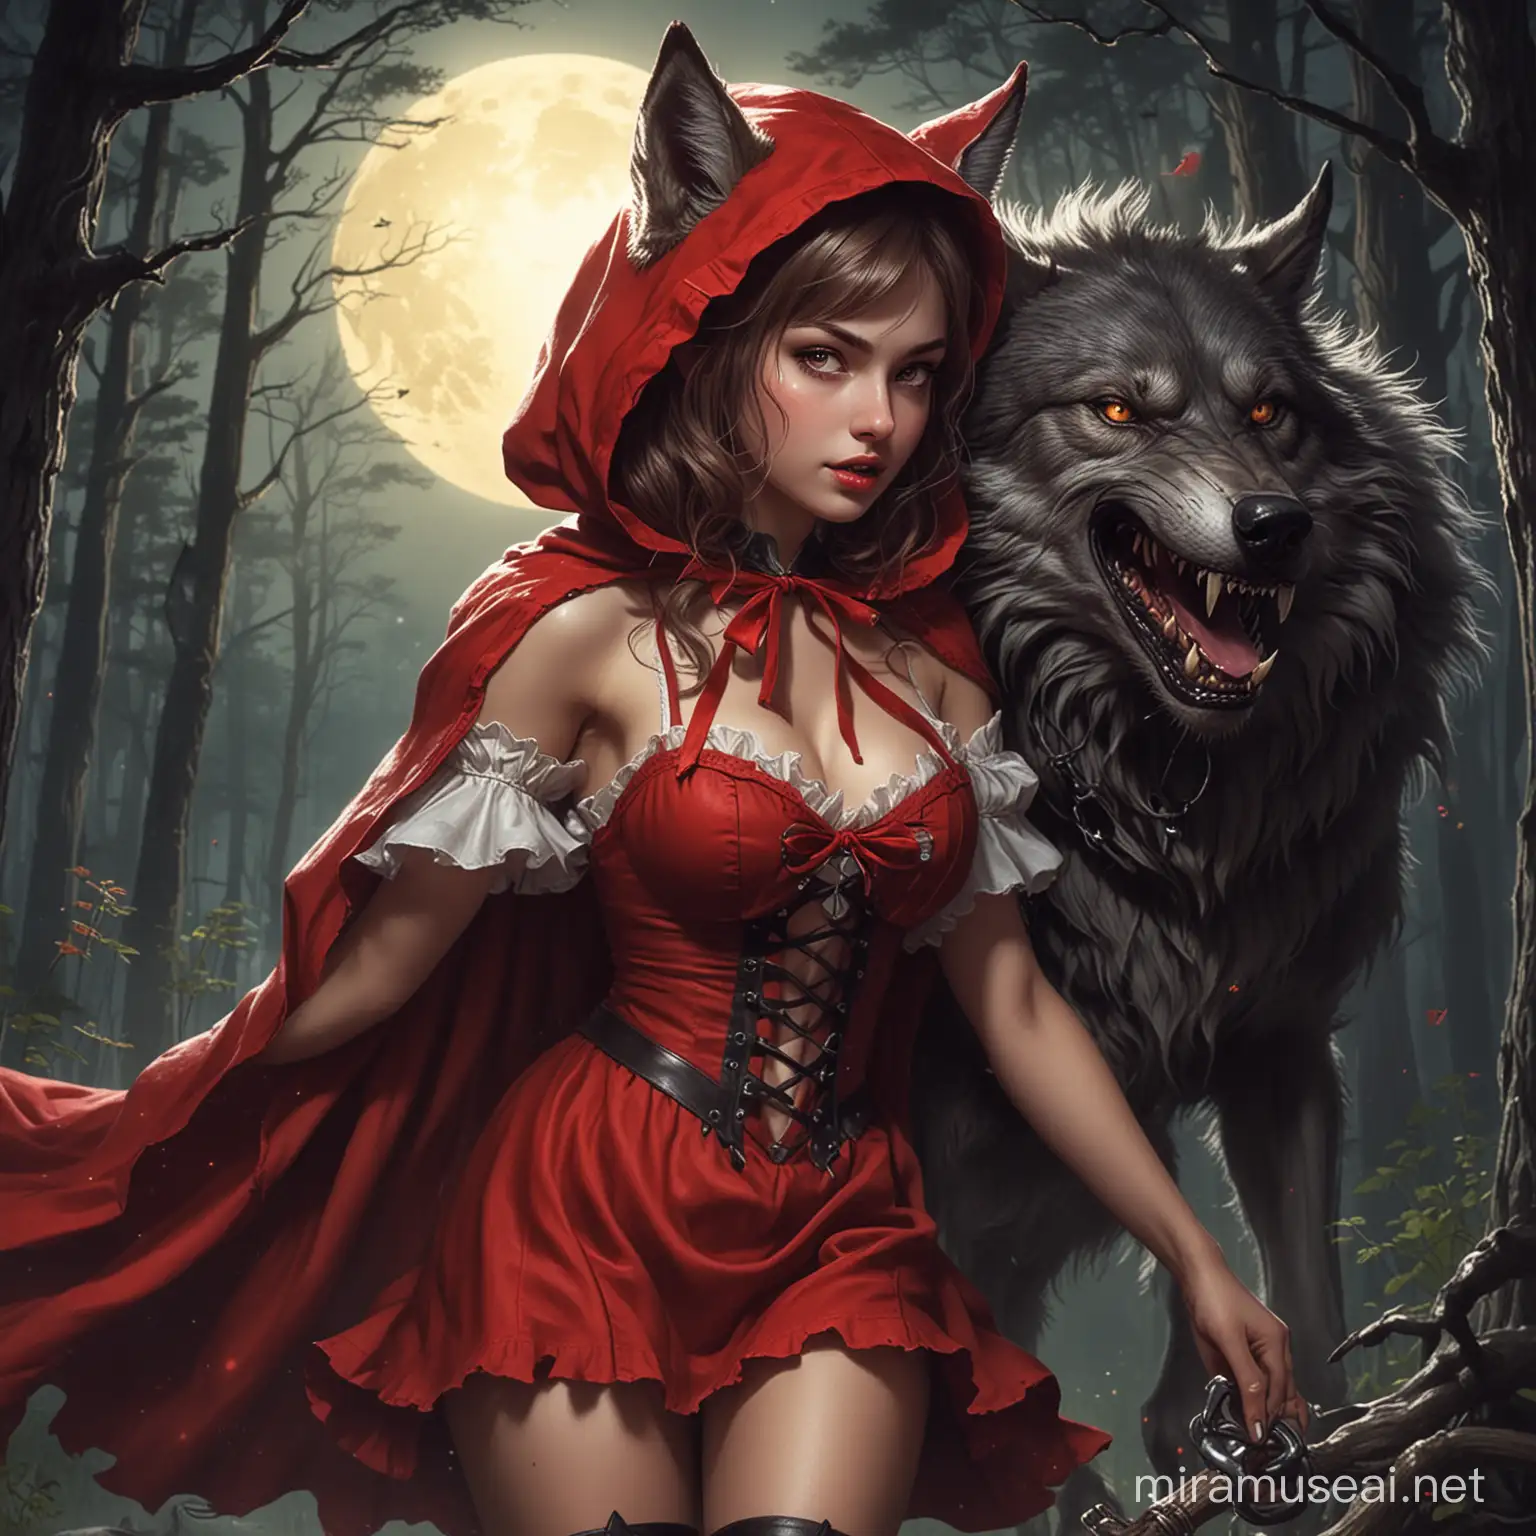 Little Red Riding Hood Attacked by Monster Wolf on Hot Summer Night